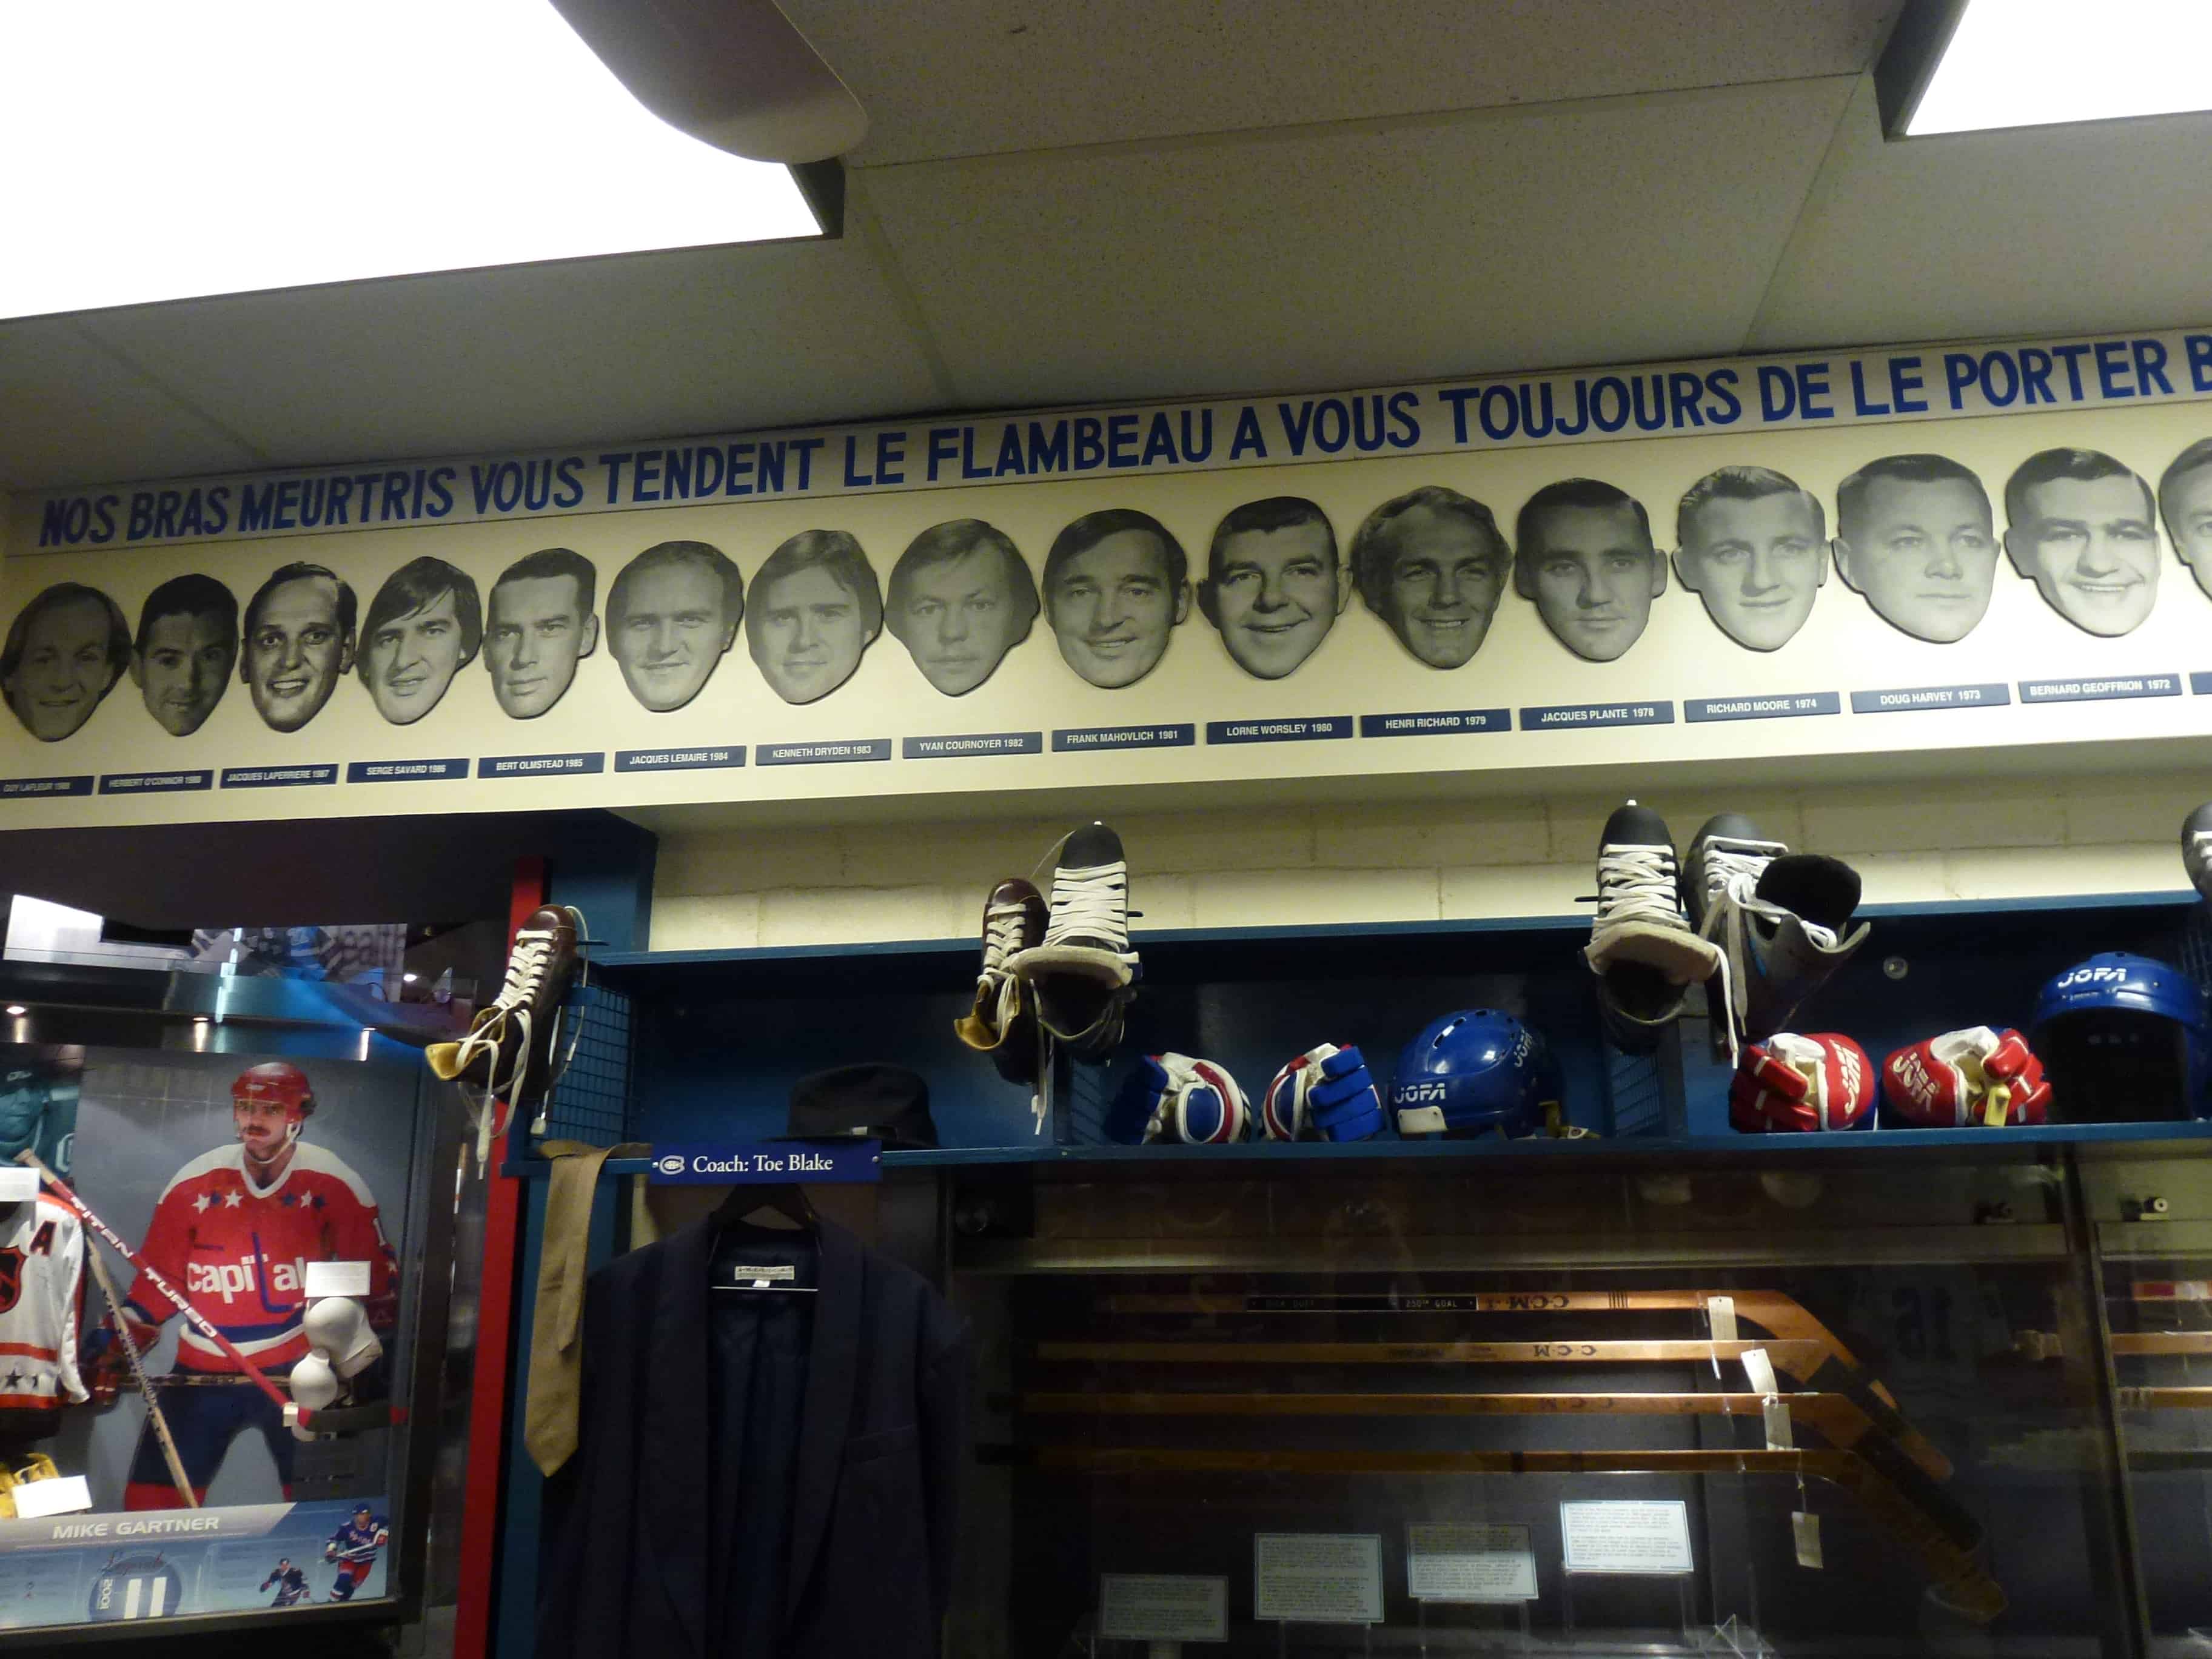 Montréal Canadiens dressing room at the Hockey Hall of Fame in Toronto, Ontario, Canada